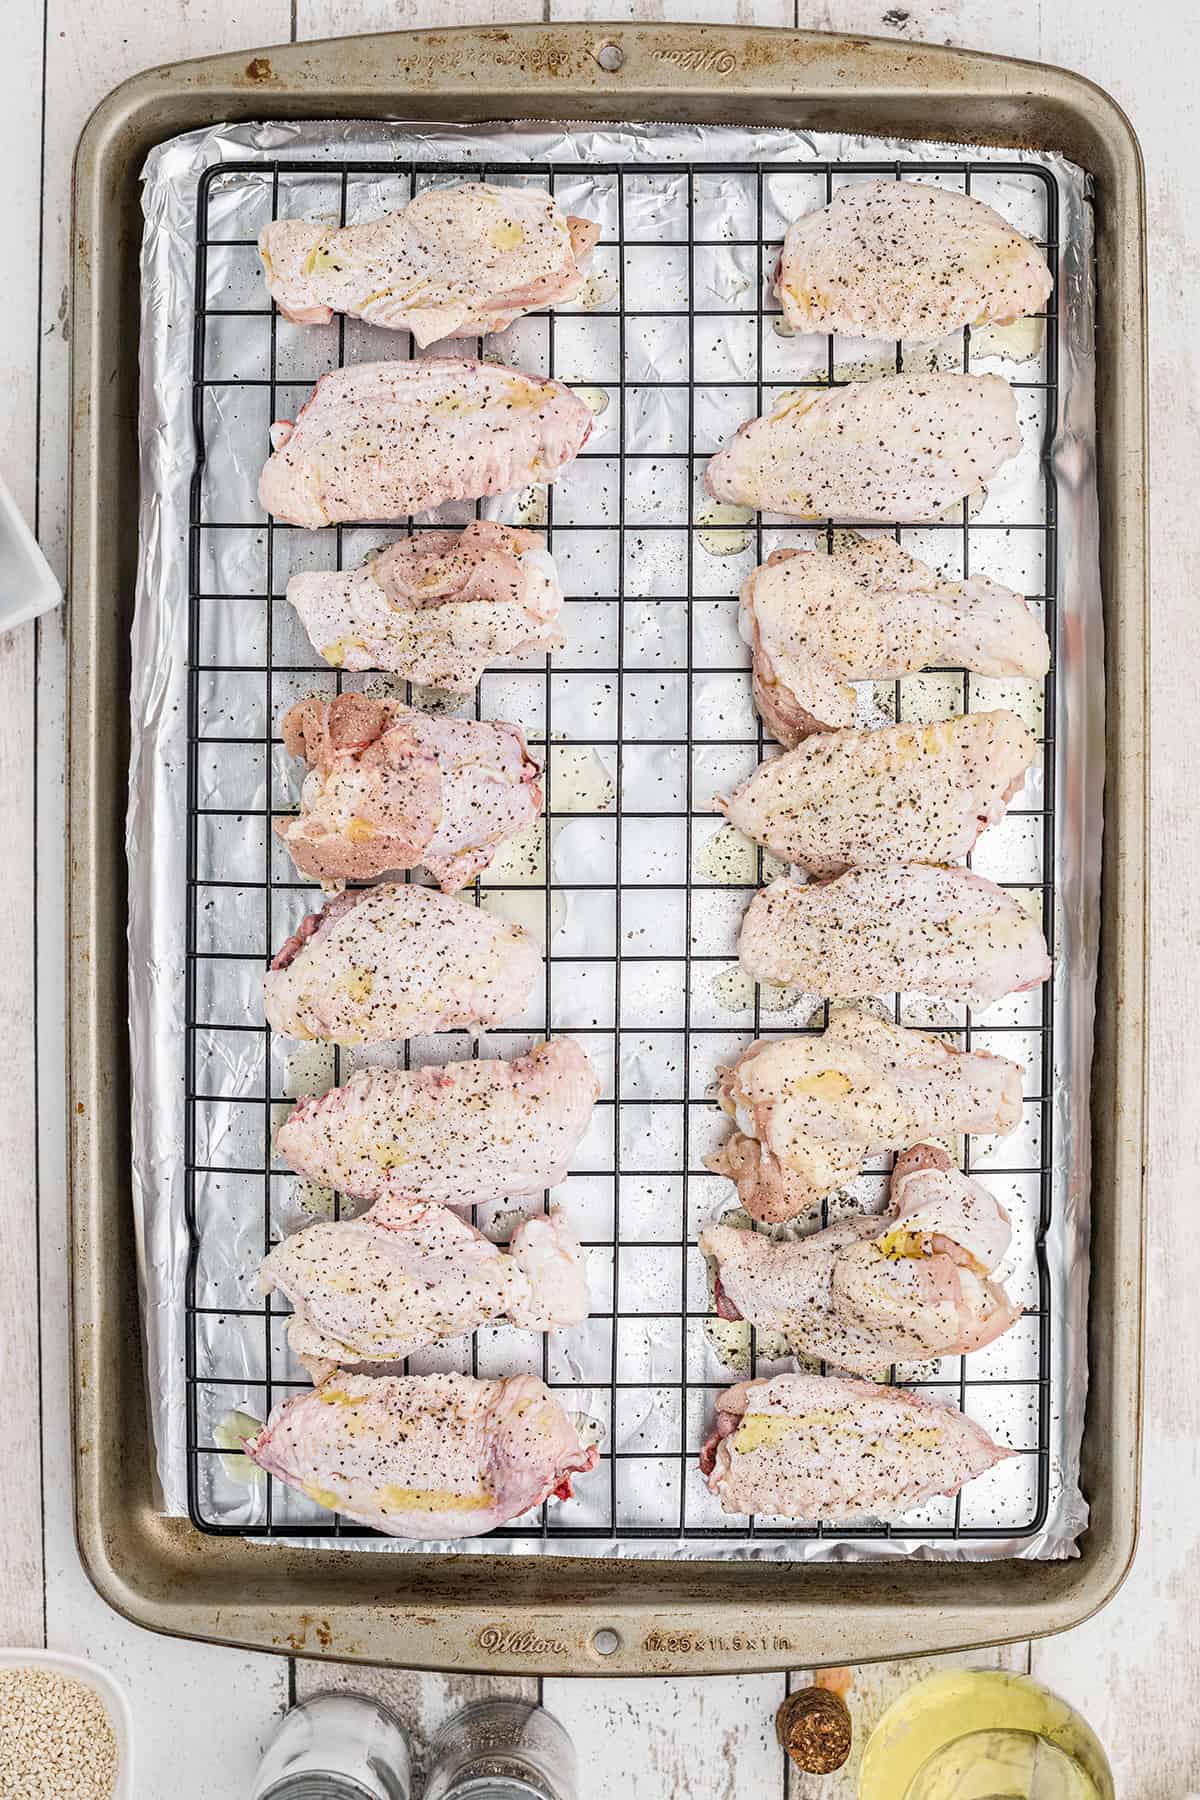 Wings on a baking tray.